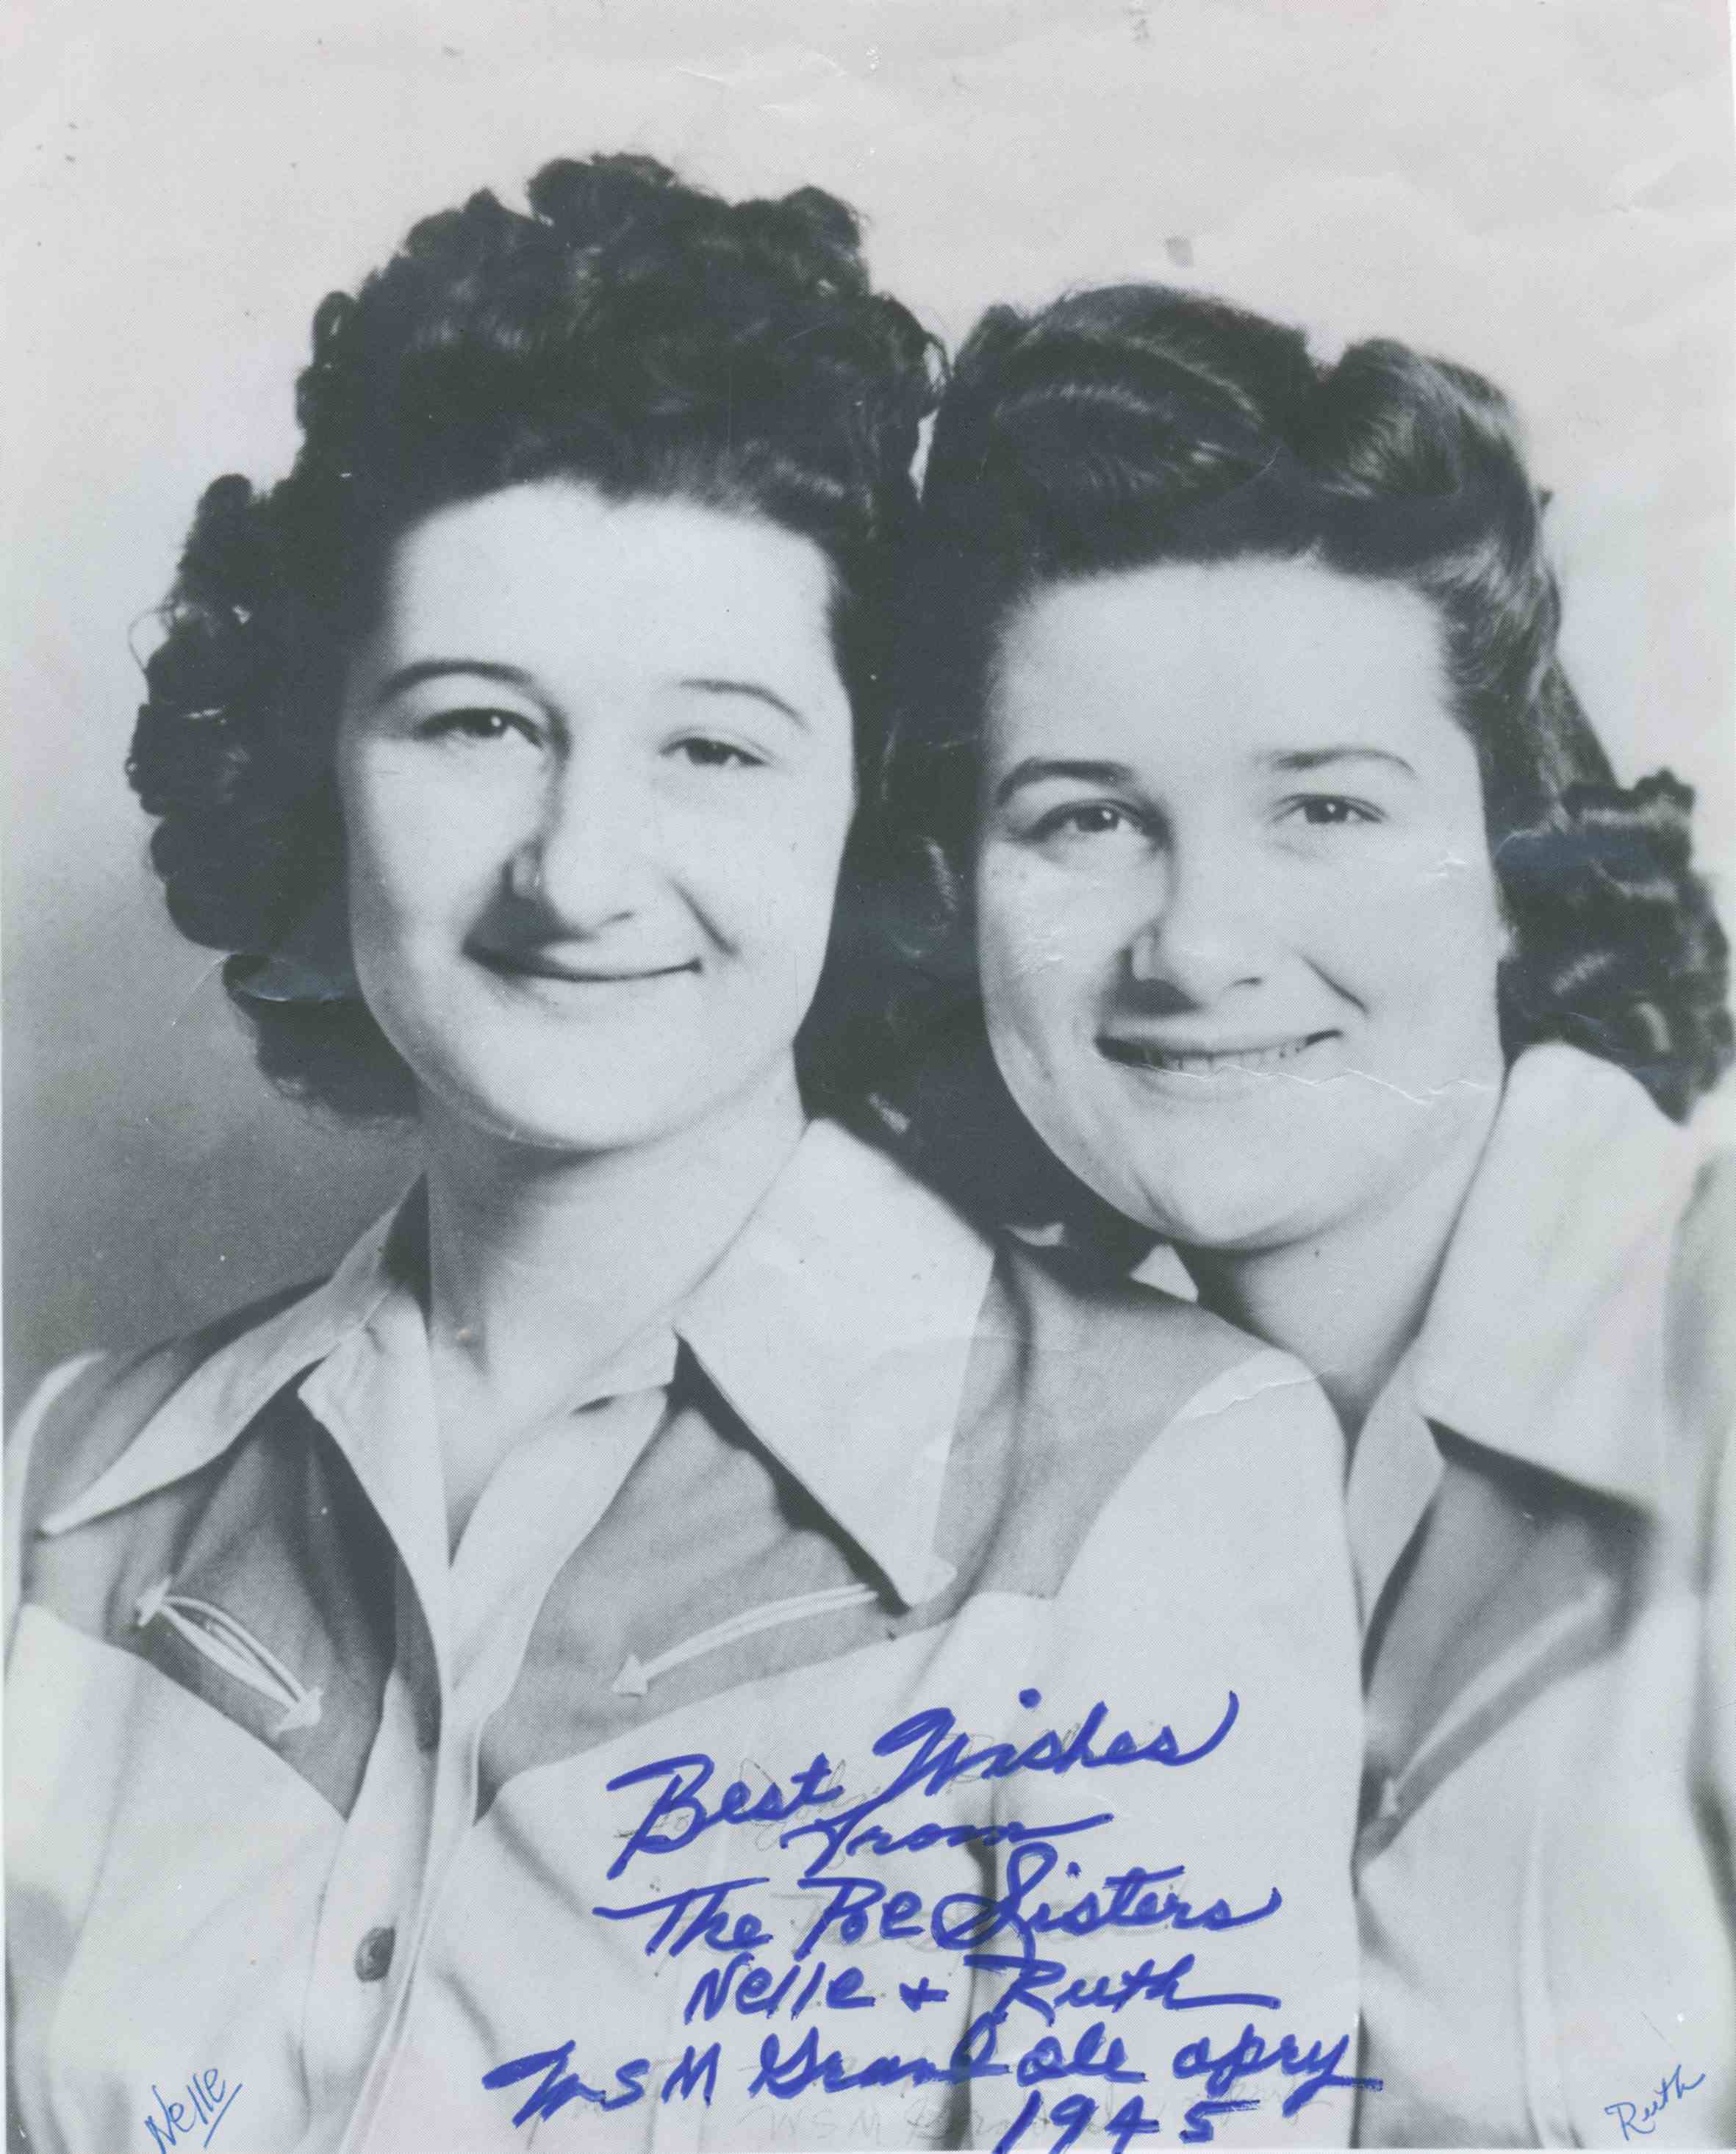 The Poe Sisters - Nelle and Ruth in 1945